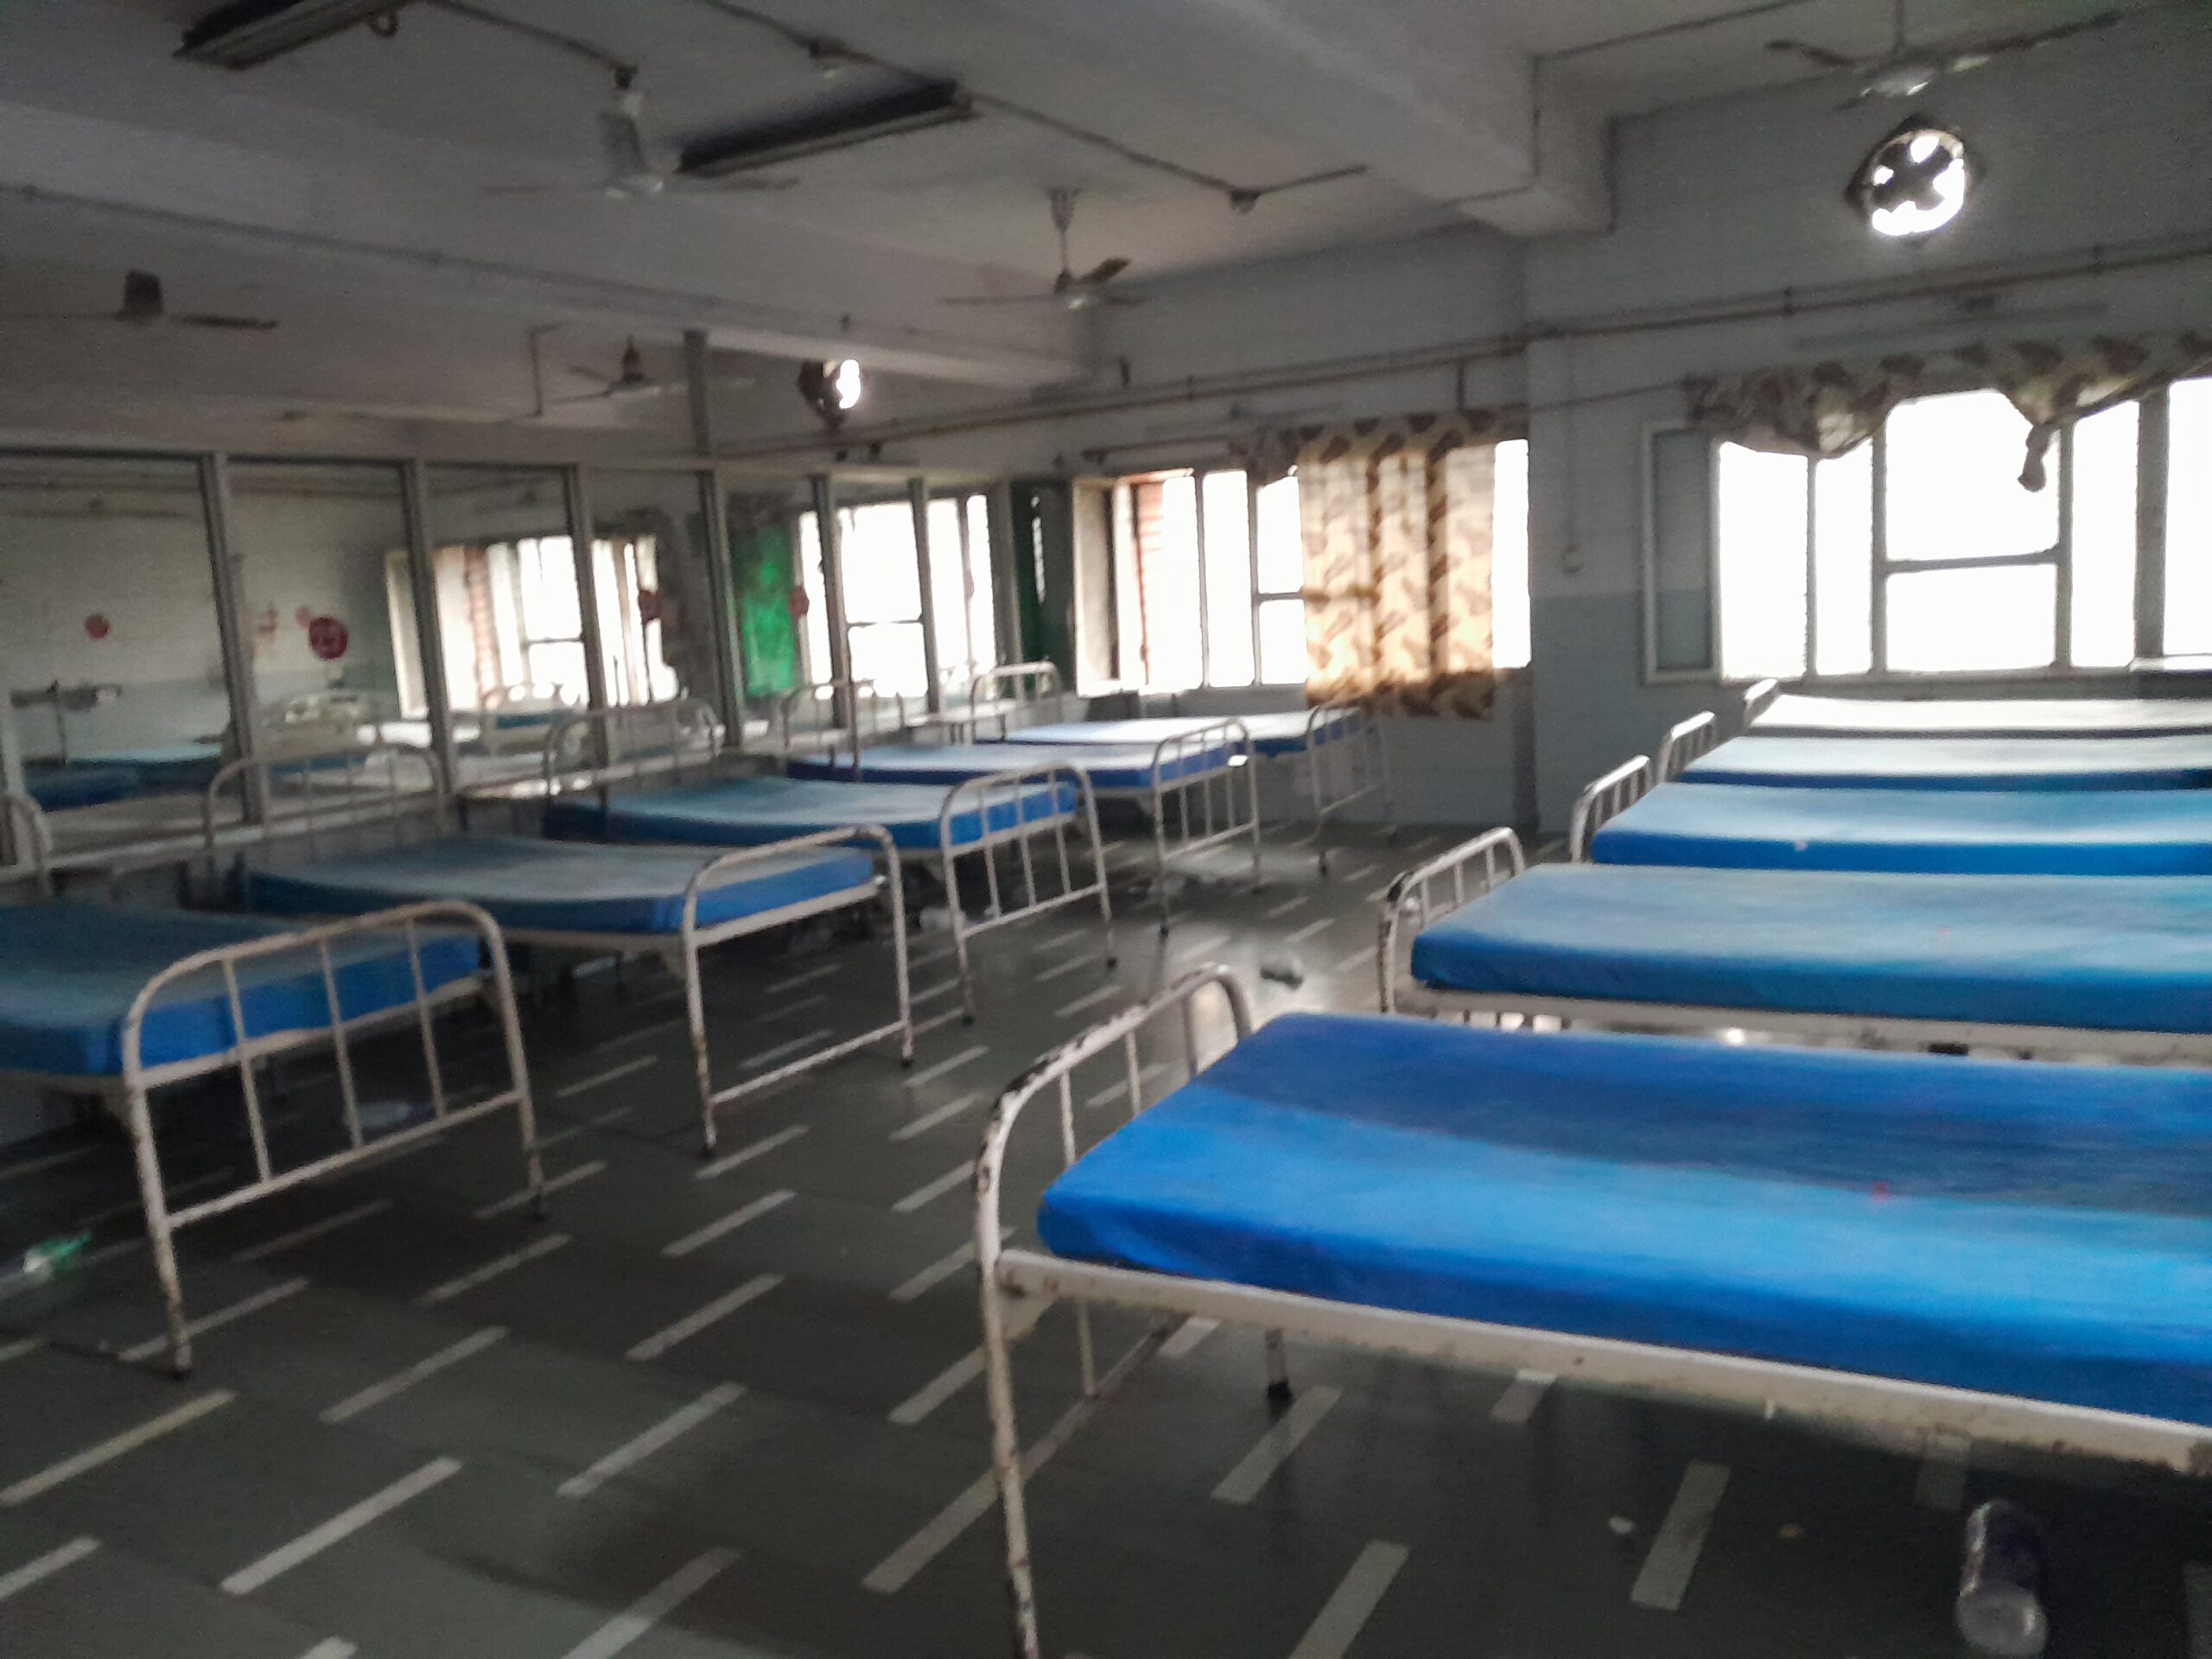 In wake of neo-natal hospital tragedy, Delhi govt to direct private, state-run facilities to complete fire audit by June 8